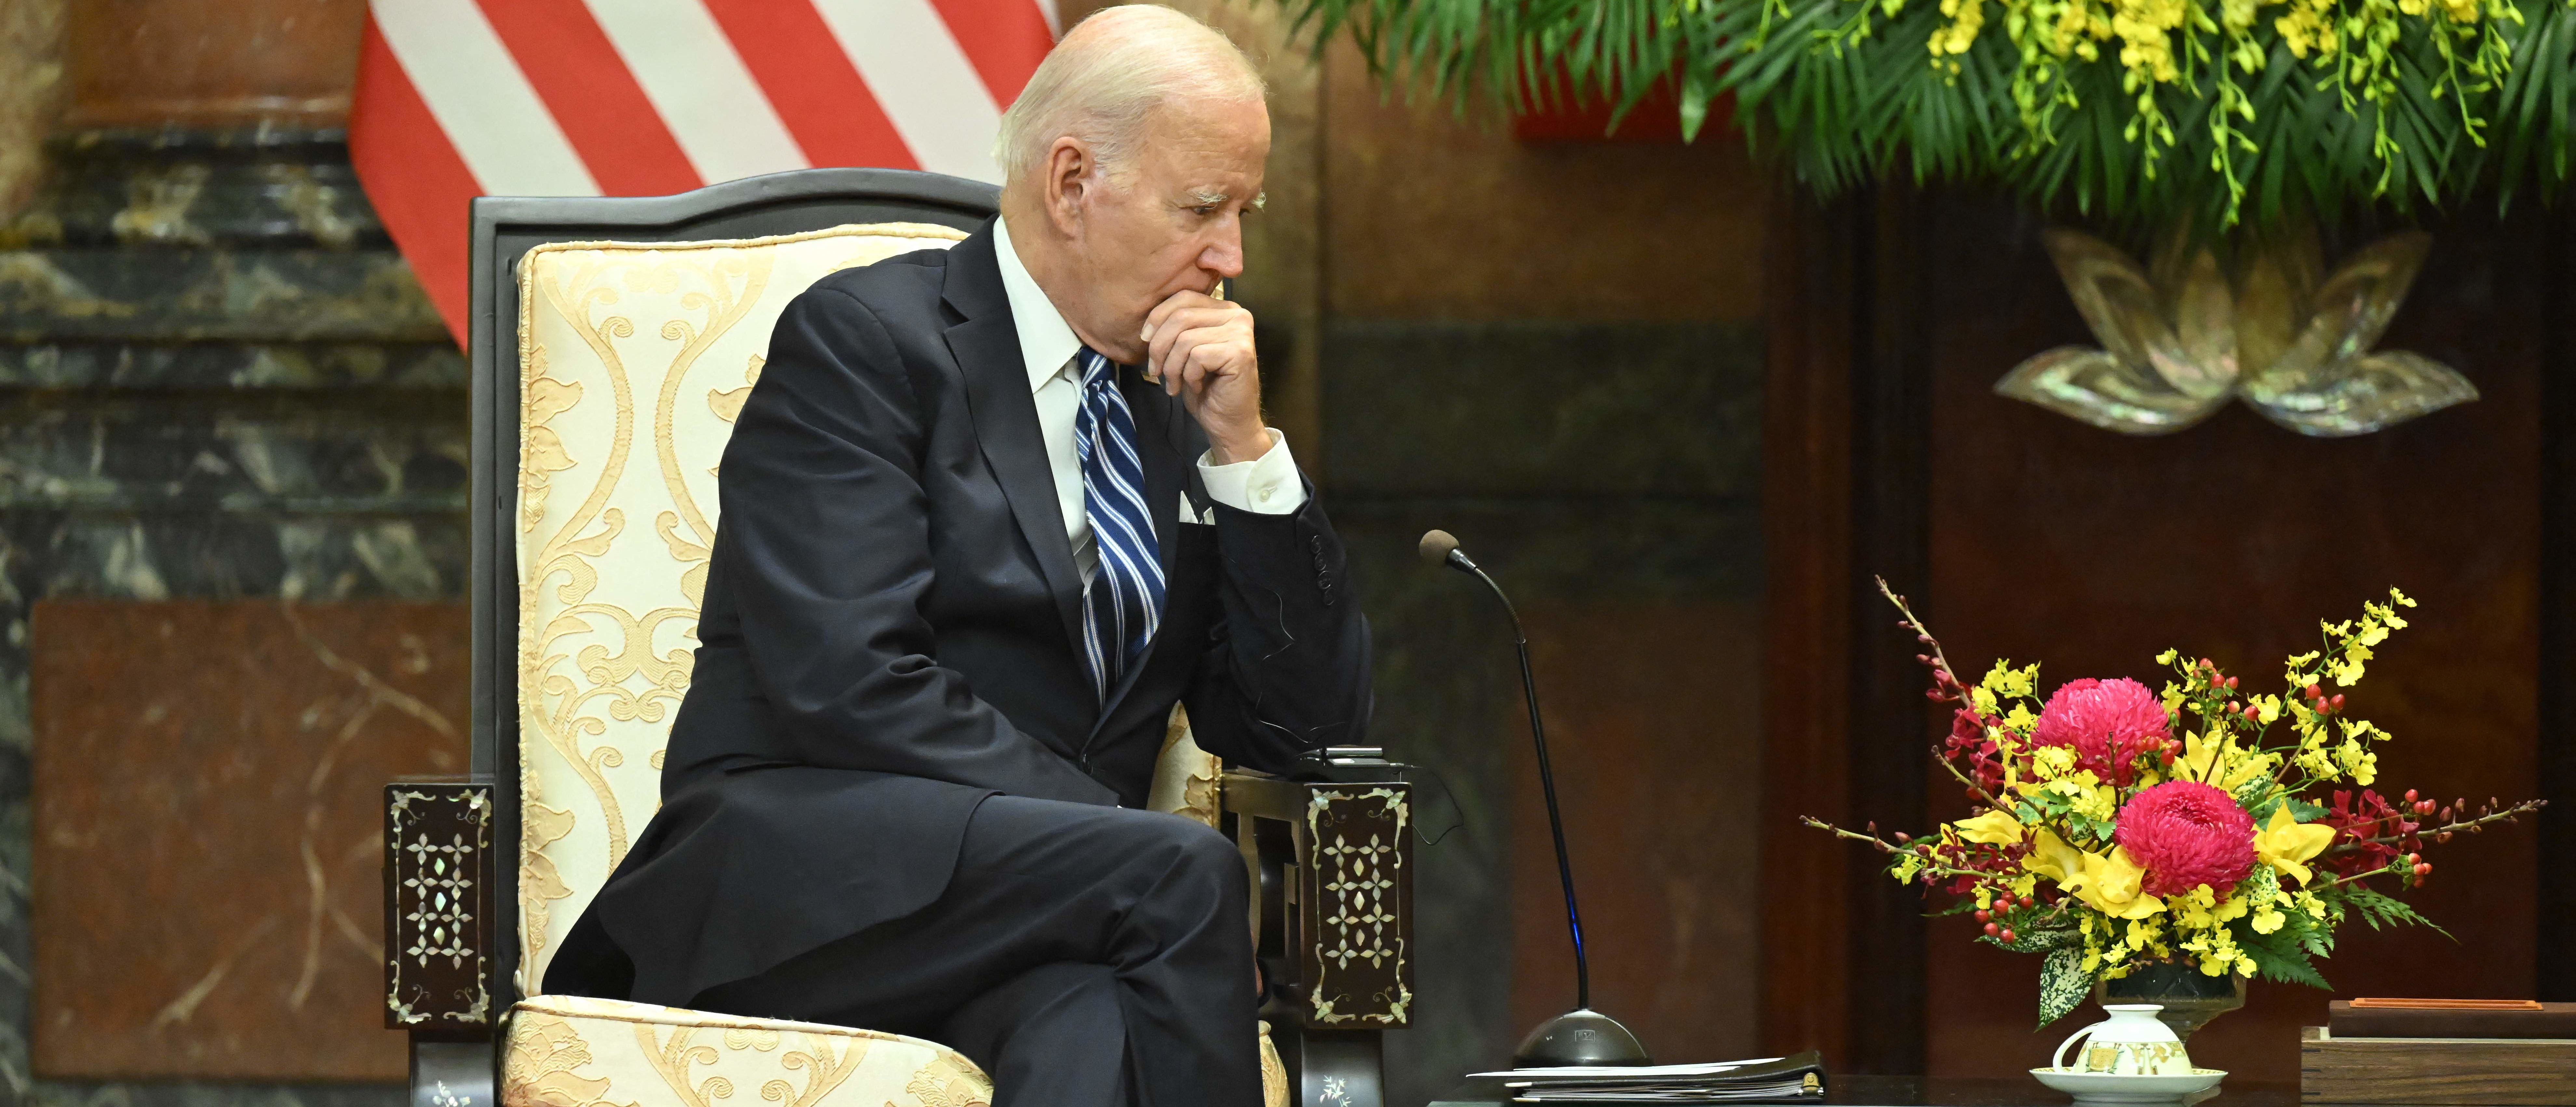 TOPSHOT - US President Joe Biden listens to Vietnam's President Vo Van Thuong during a meeting at the Presidential Palace in Hanoi on September 11, 2023. The United States and Vietnam warned against the "threat or use of force" in the disputed South China Sea, days after the latest clash involving Chinese vessels. (Photo by SAUL LOEB / AFP) (Photo by SAUL LOEB/AFP via Getty Images)